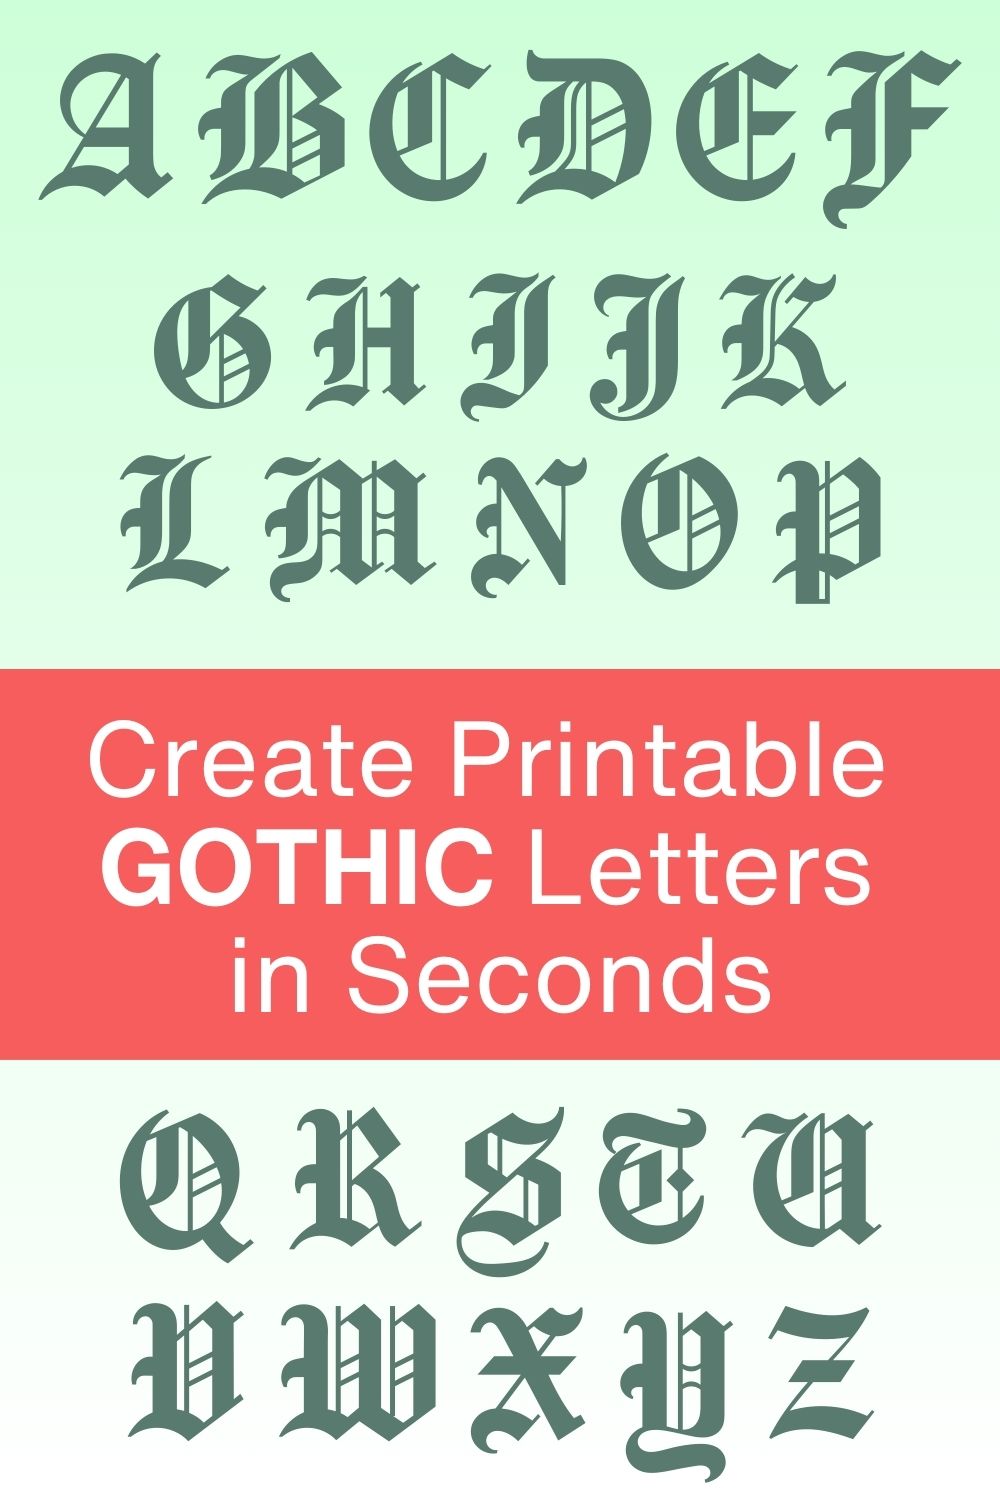 FREE printable letter gothic, DIY, font, templates, bold number and alphabet downloadable patterns, typeface